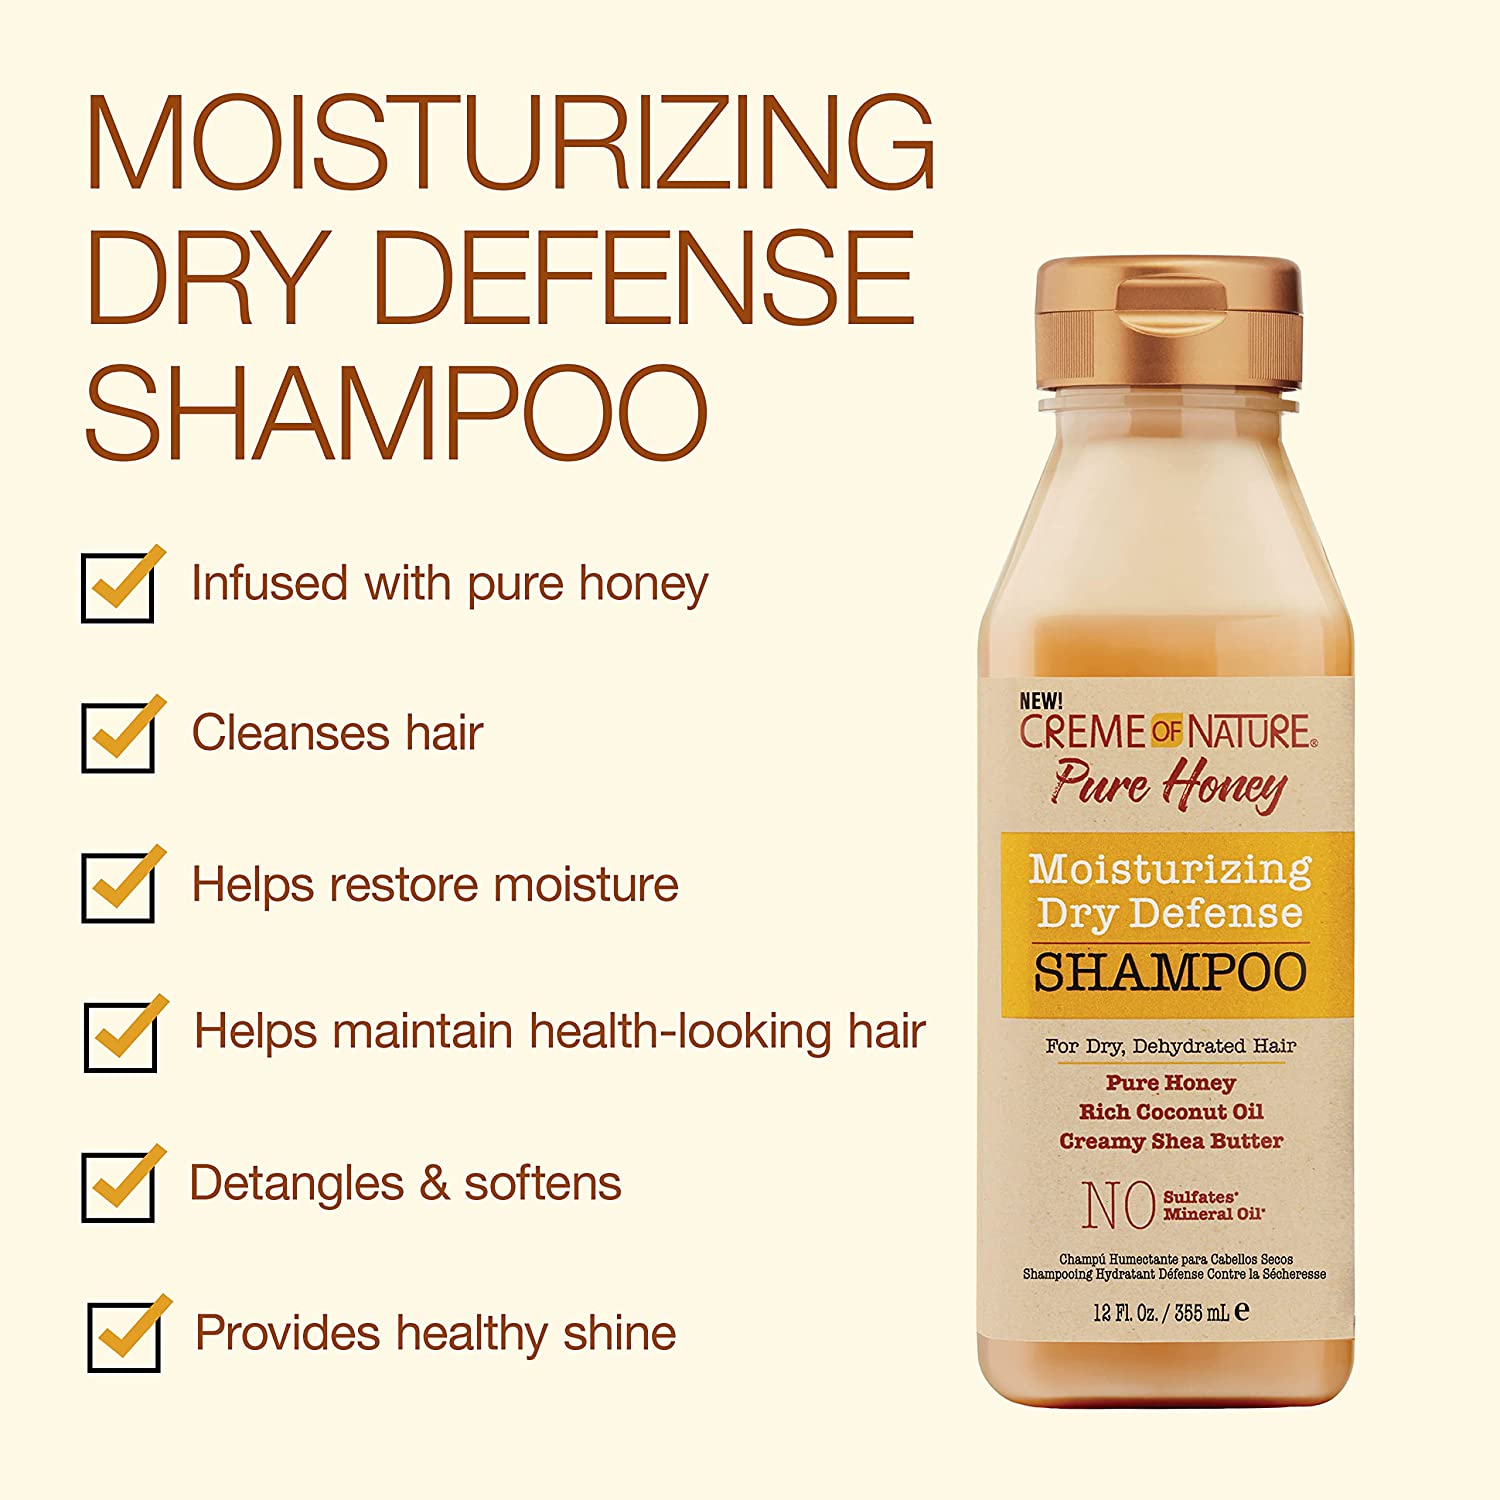 Coconut Oil & Shea Butter Shampoo by Creme of Nature,Dry Defense for Damaged Hair, Formula with Pure Honey, 12.07 Fl Oz Find Your New Look Today!